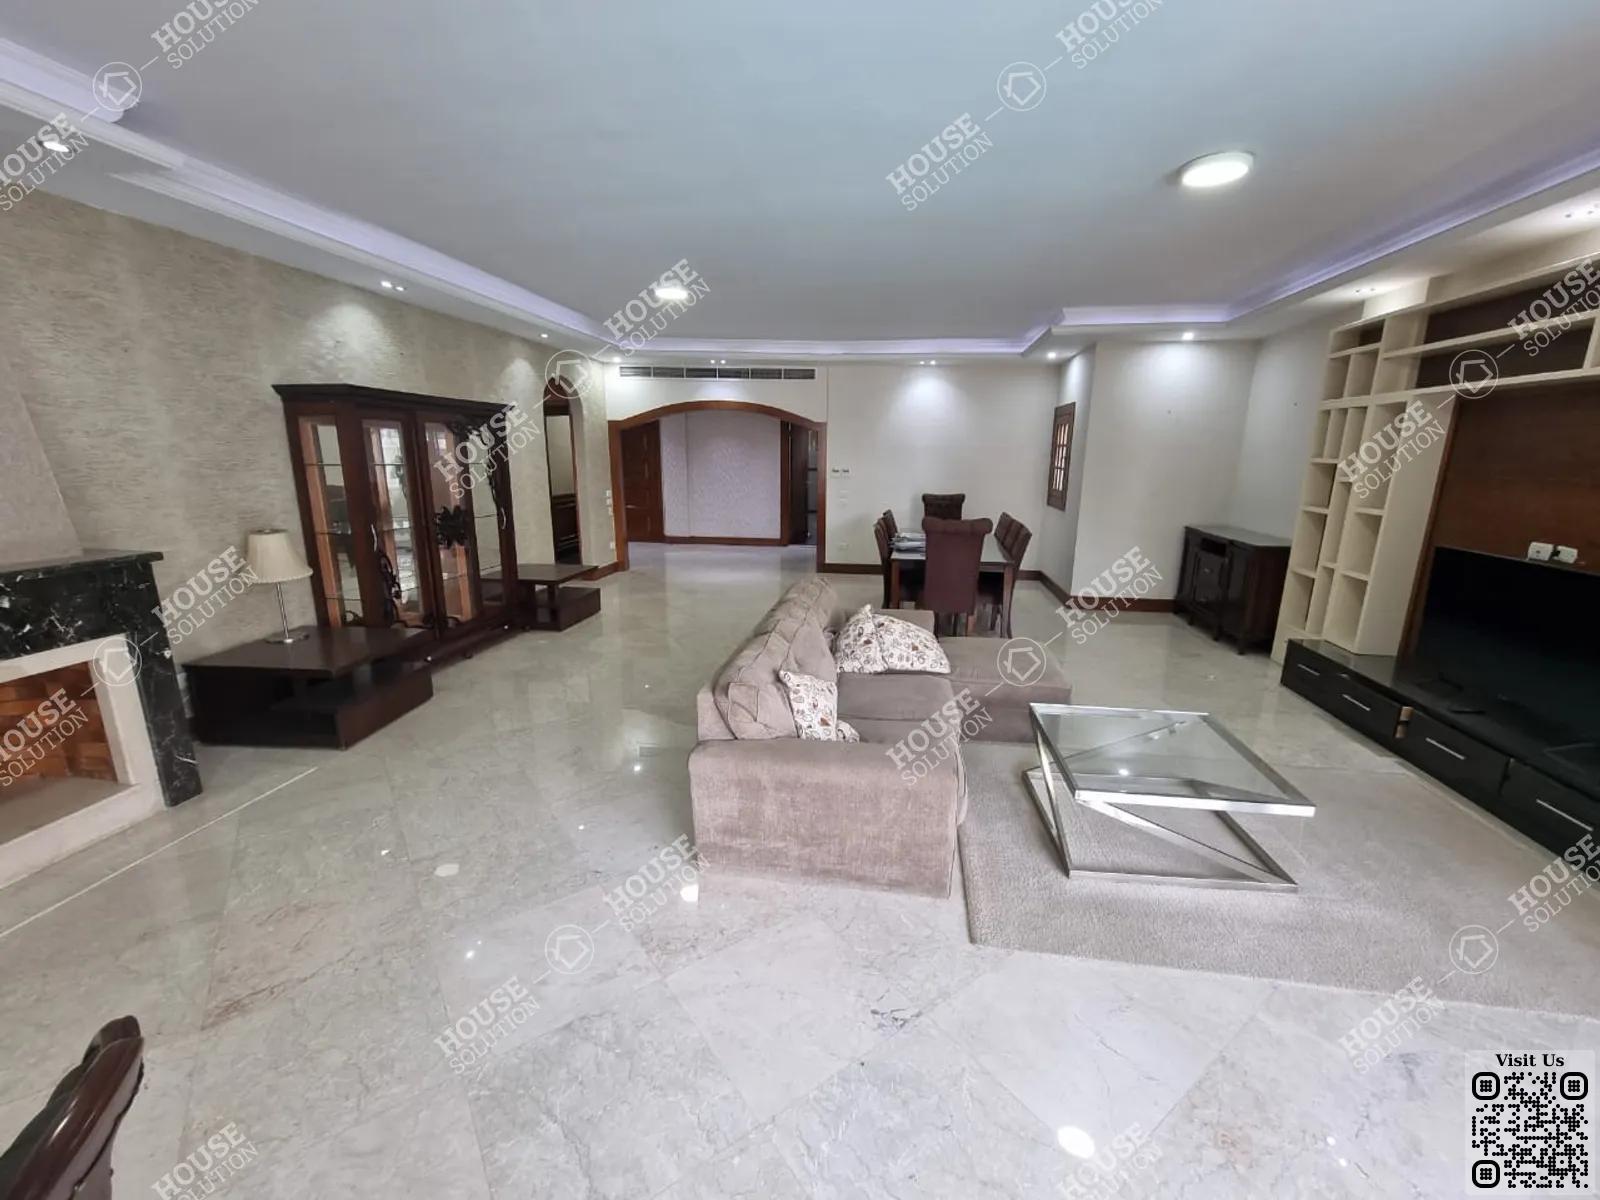 RECEPTION  @ Apartments For Rent In Maadi Maadi Sarayat Area: 350 m² consists of 3 Bedrooms 4 Bathrooms Furnished 5 stars #4897-0